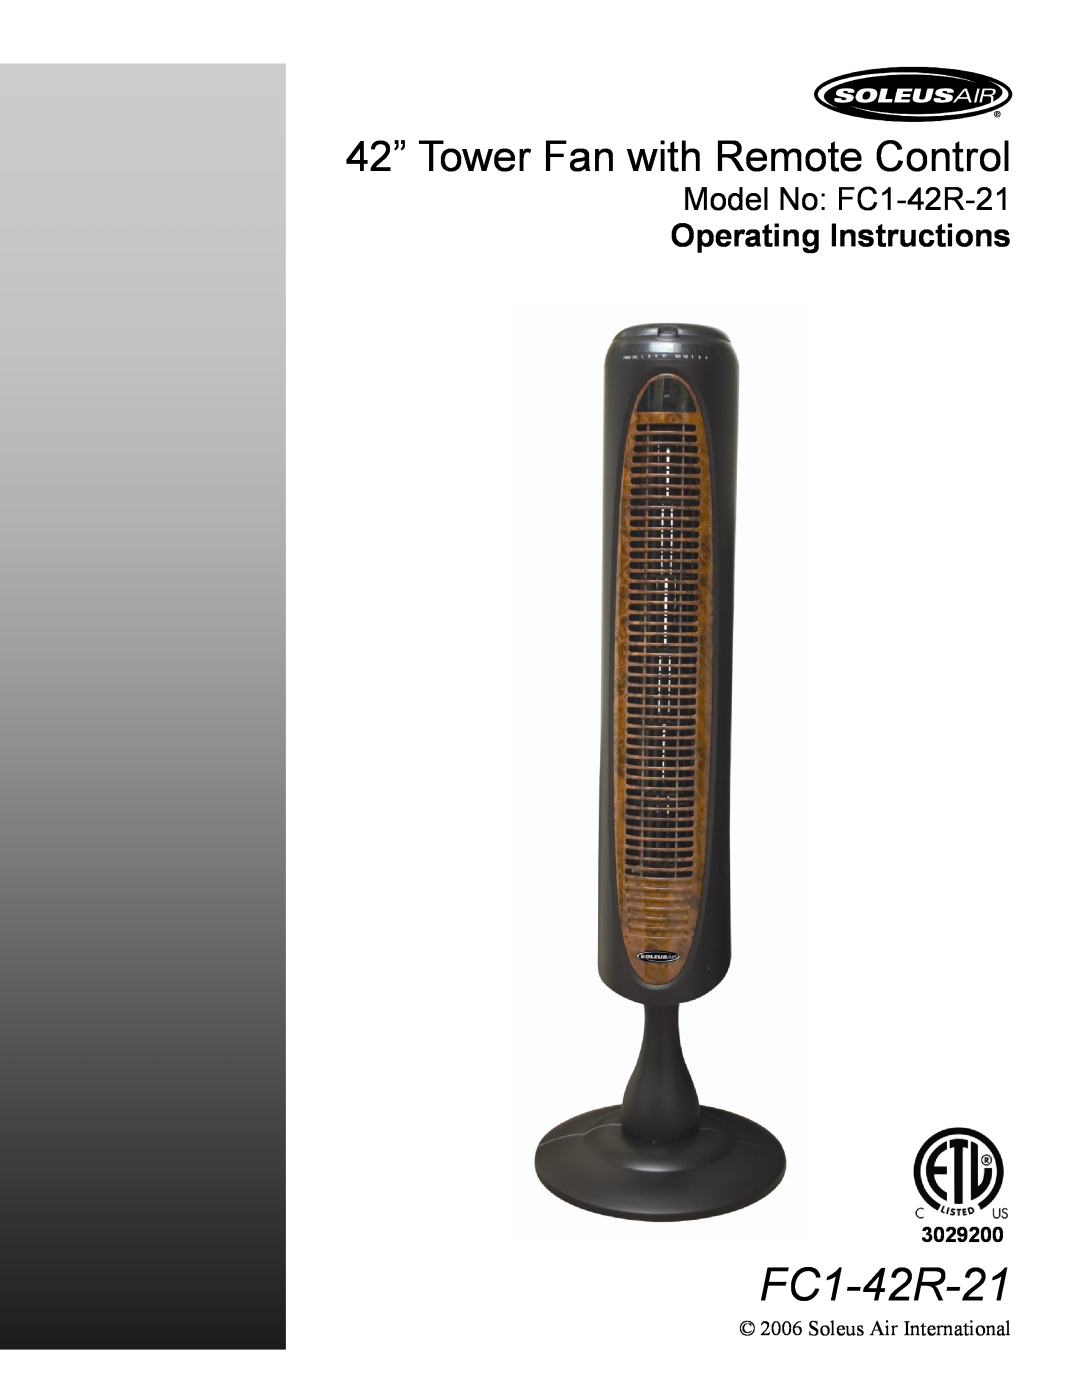 Soleus Air manual 42” Tower Fan with Remote Control, Model No FC1-42R-21 Operating Instructions 